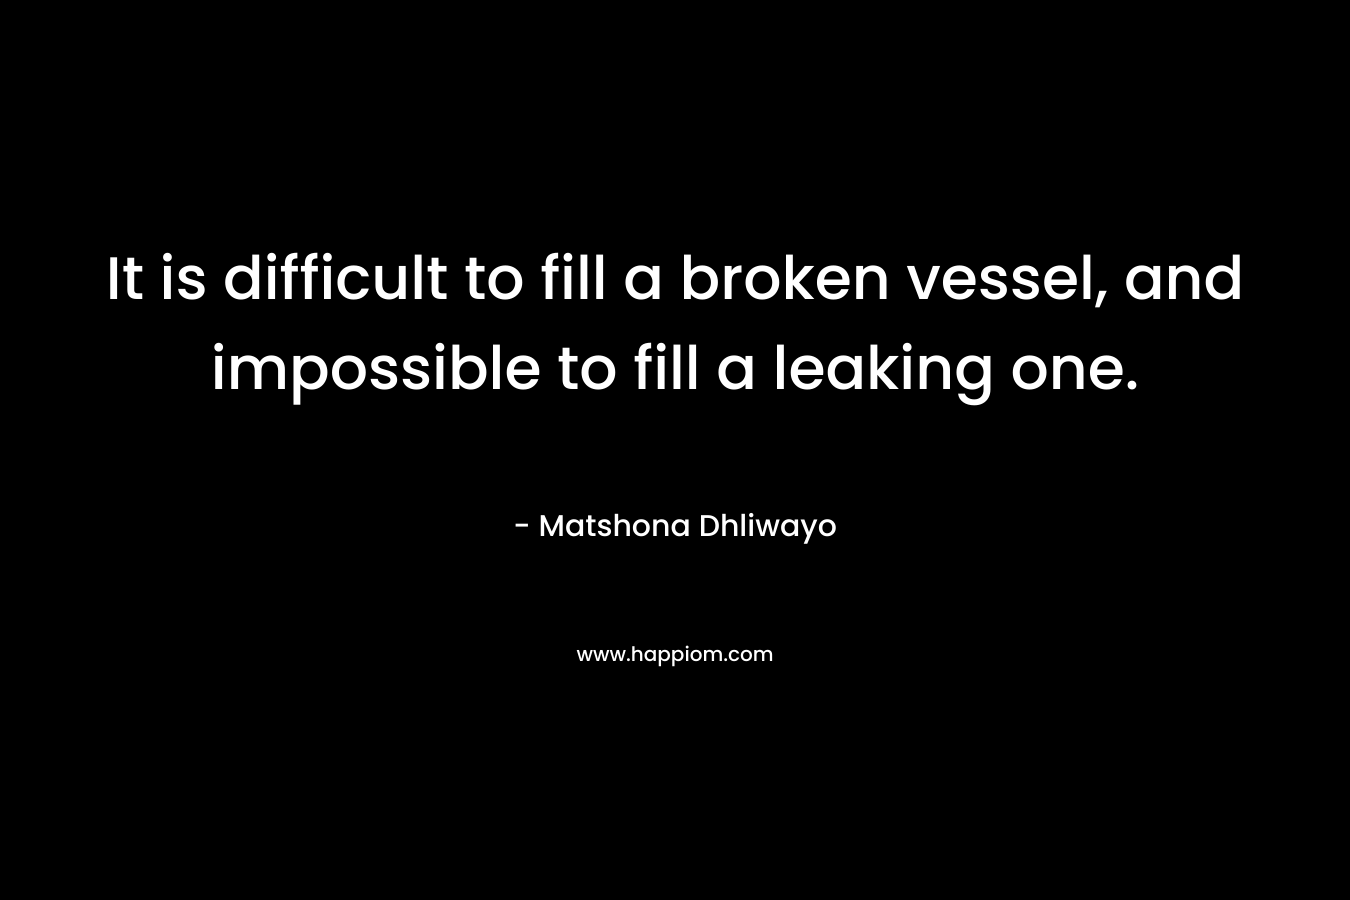 It is difficult to fill a broken vessel, and impossible to fill a leaking one.